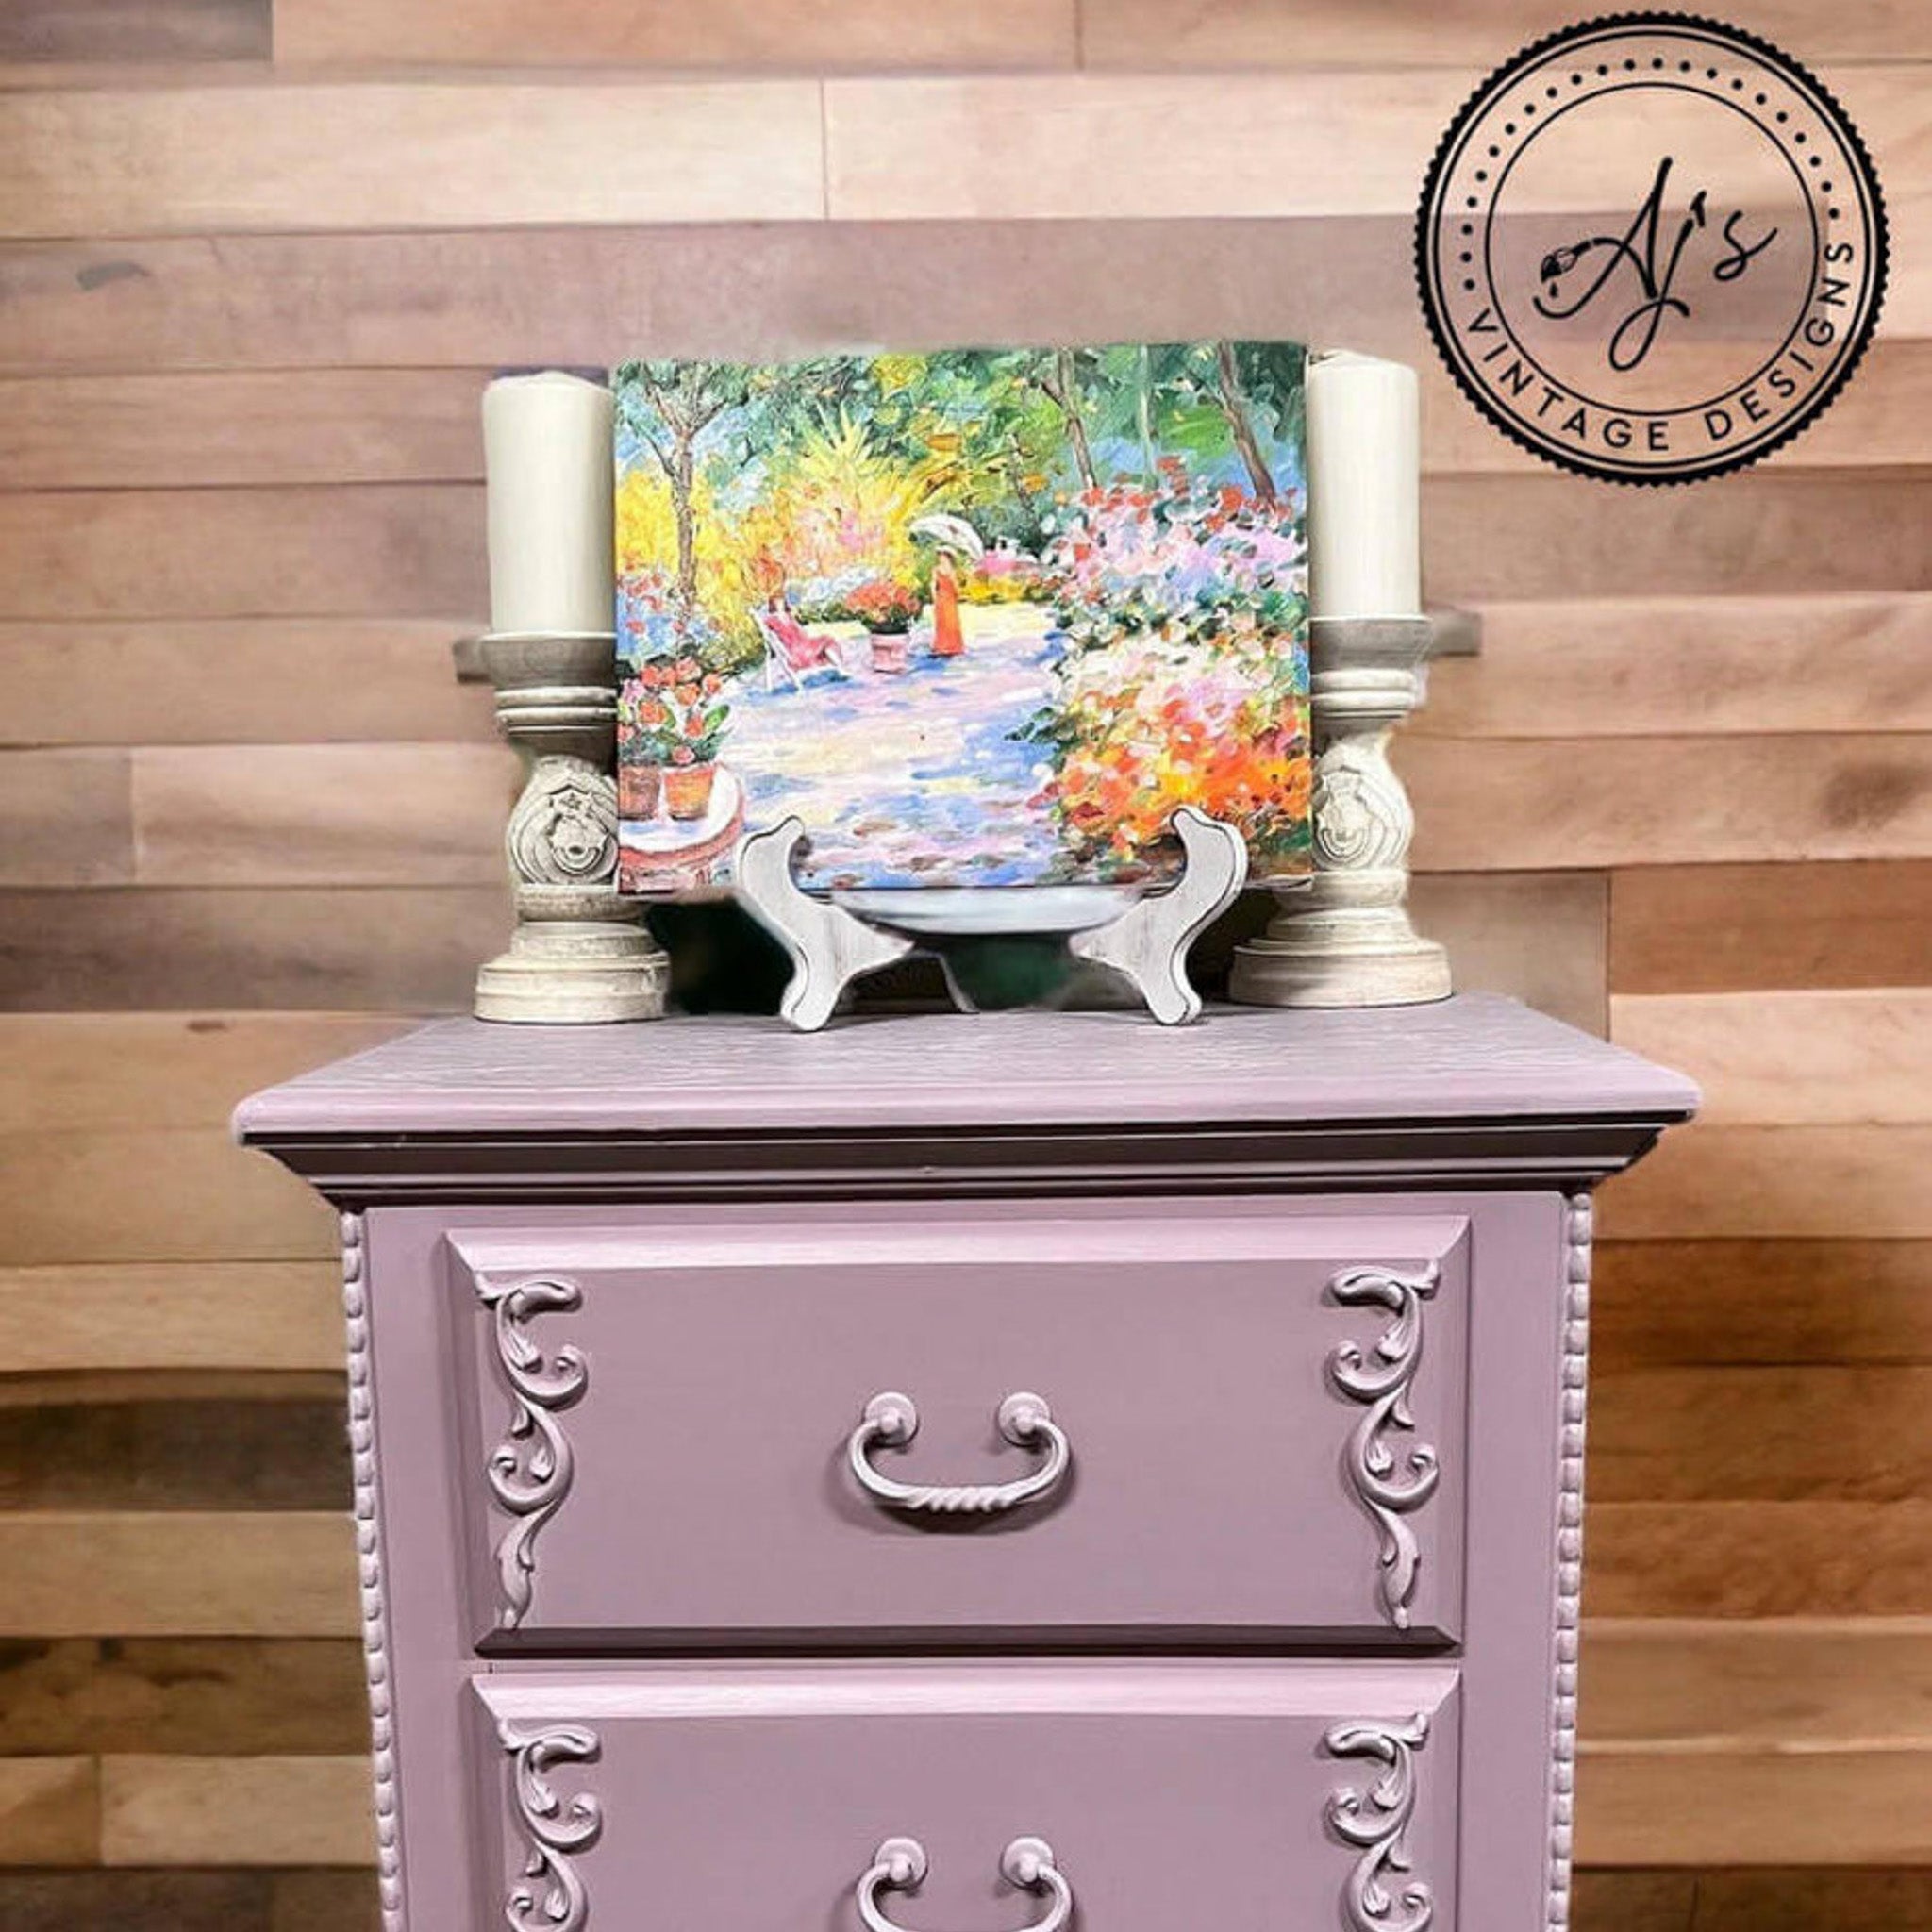 A vintage nightstand refurbished by Aj's Vintage Designs is painted in Dixie Belle's Secret Path chalk mineral paint.